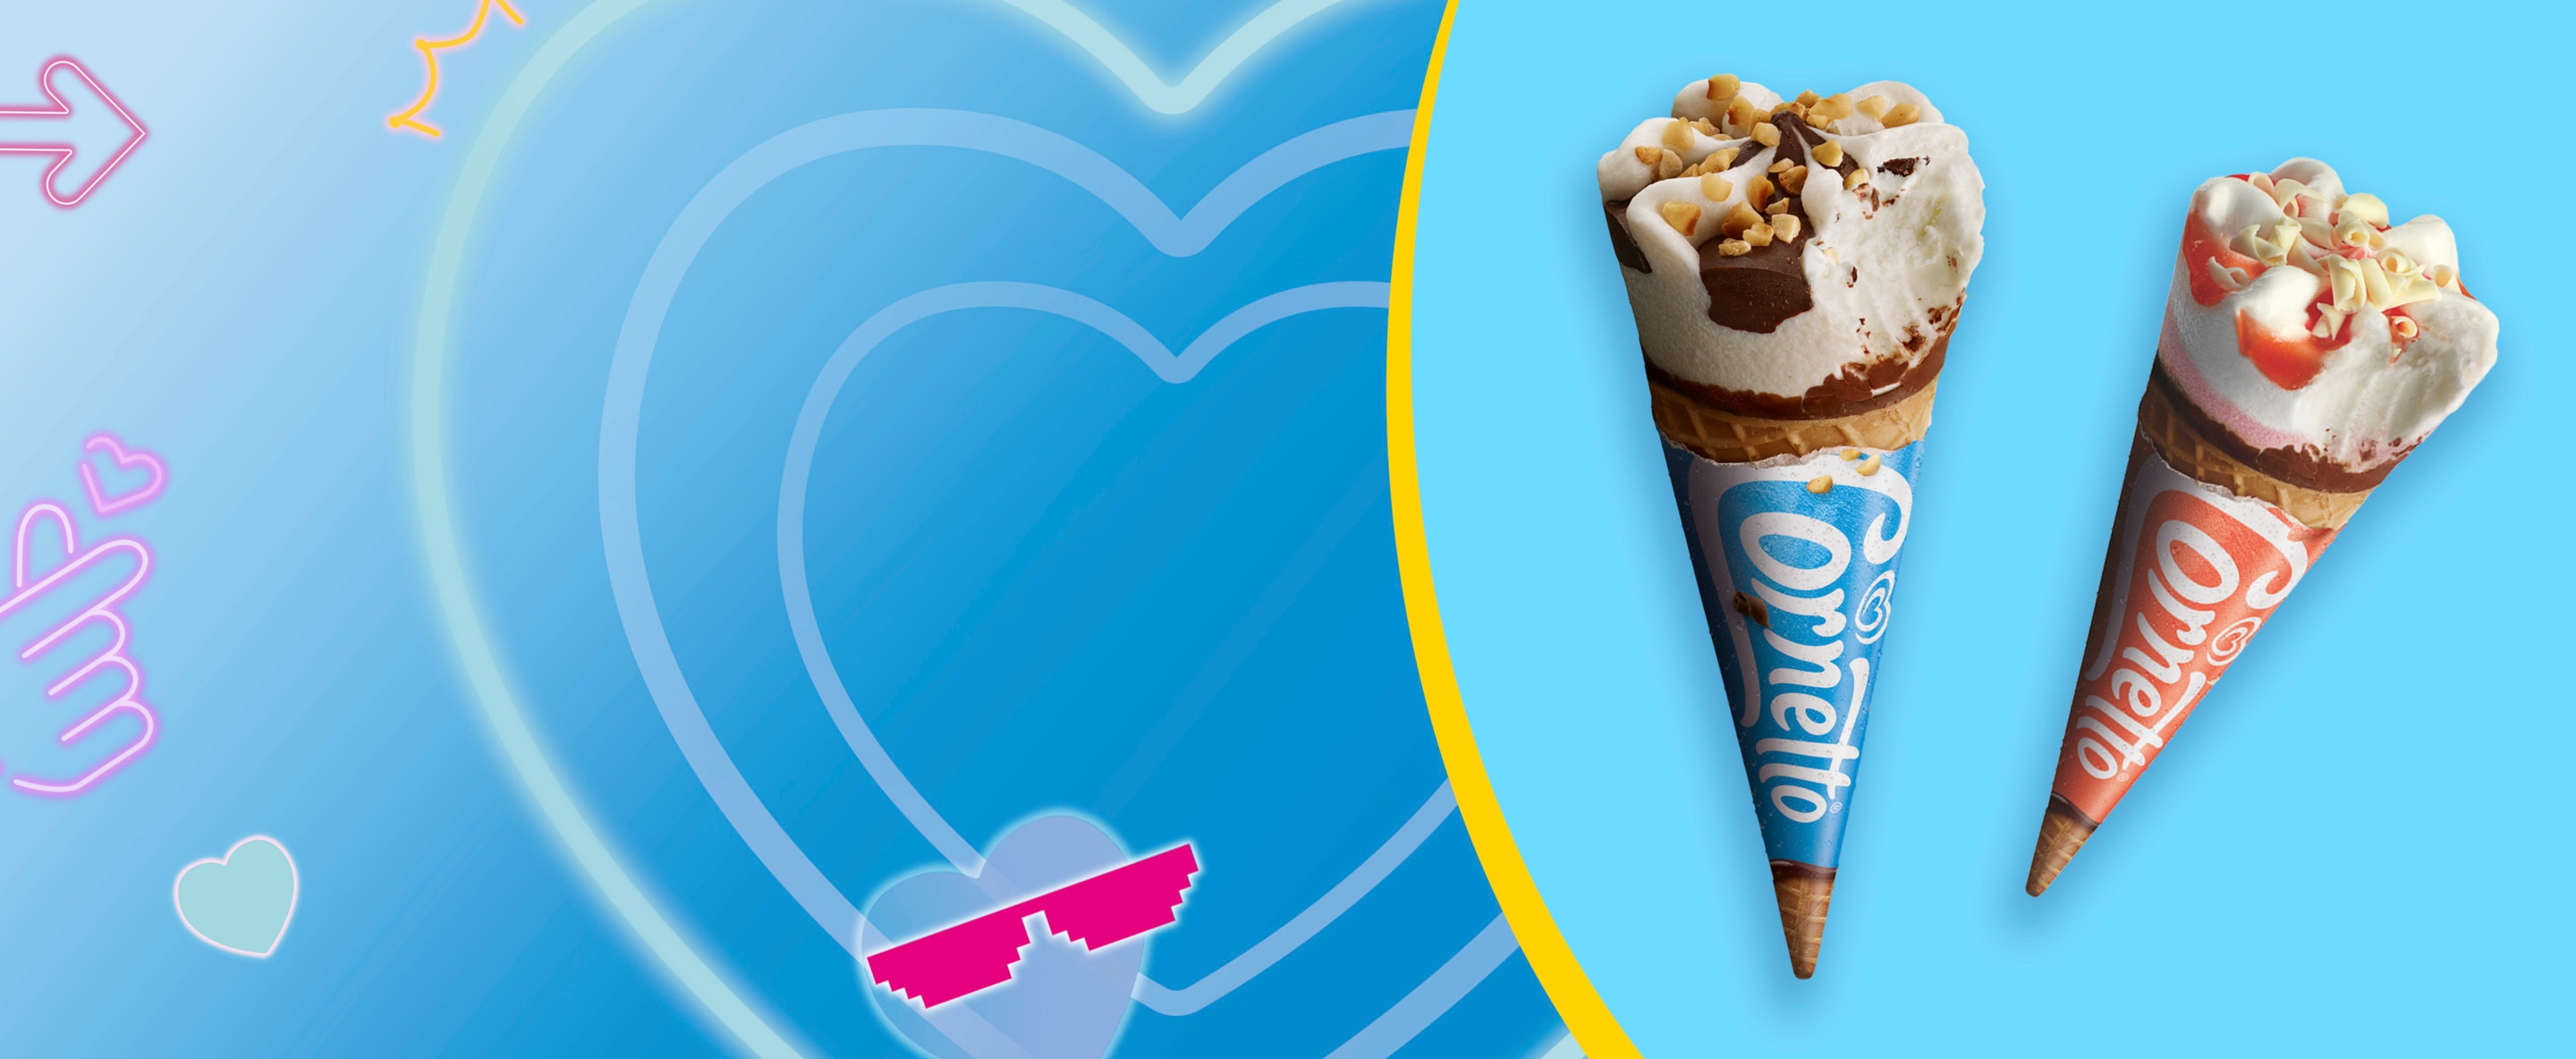 Cornetto product on blue background